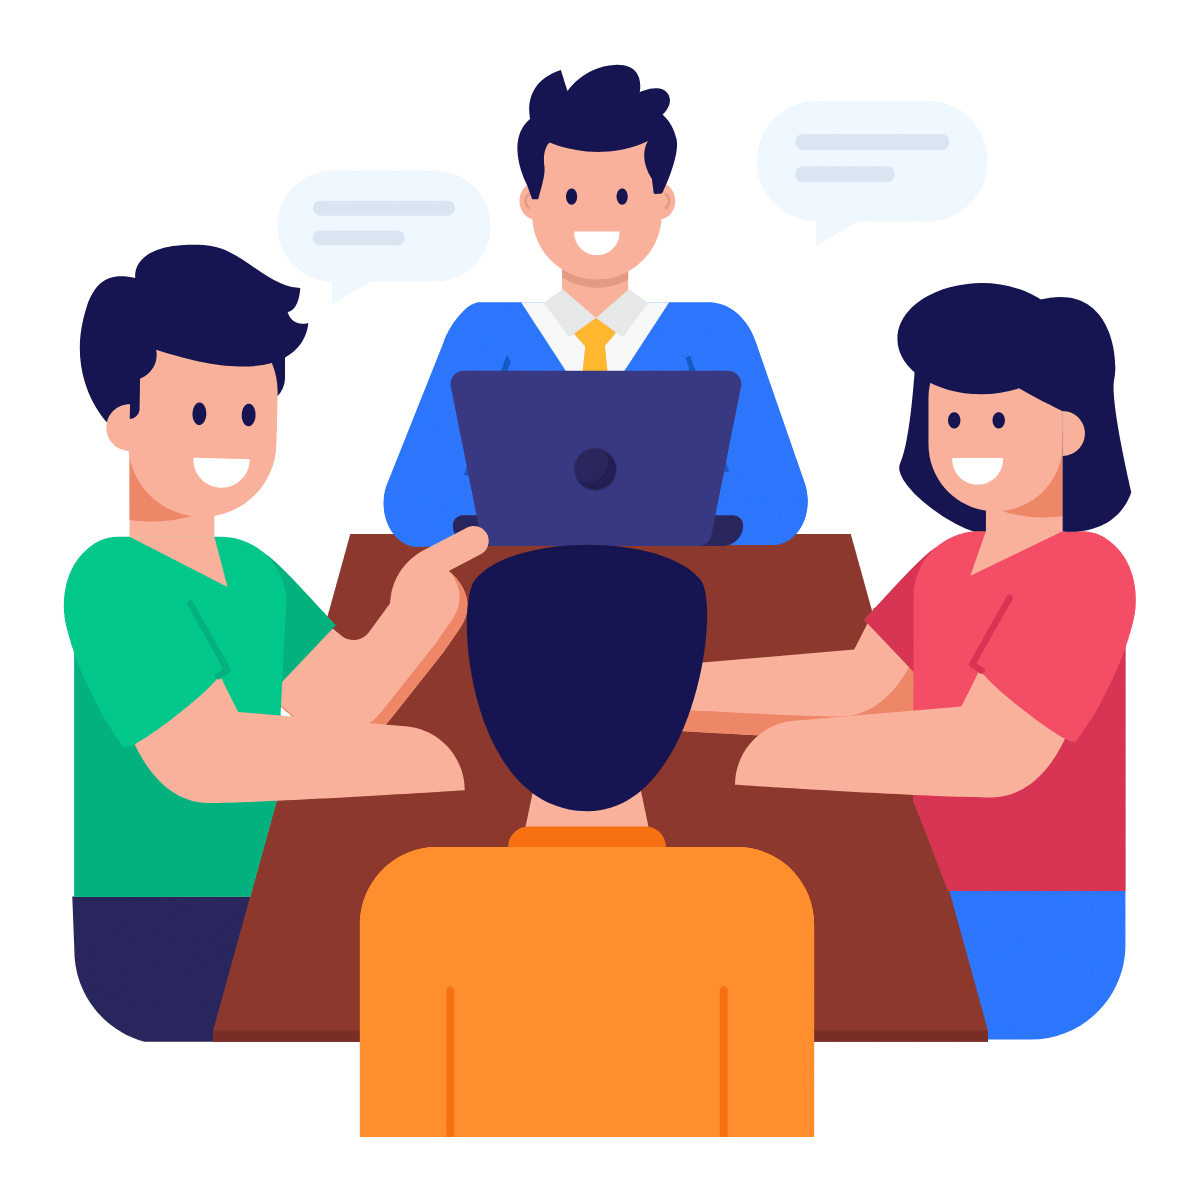 Illustrated image of four people sat around a table working collaboratively on an inclusive communication workshop